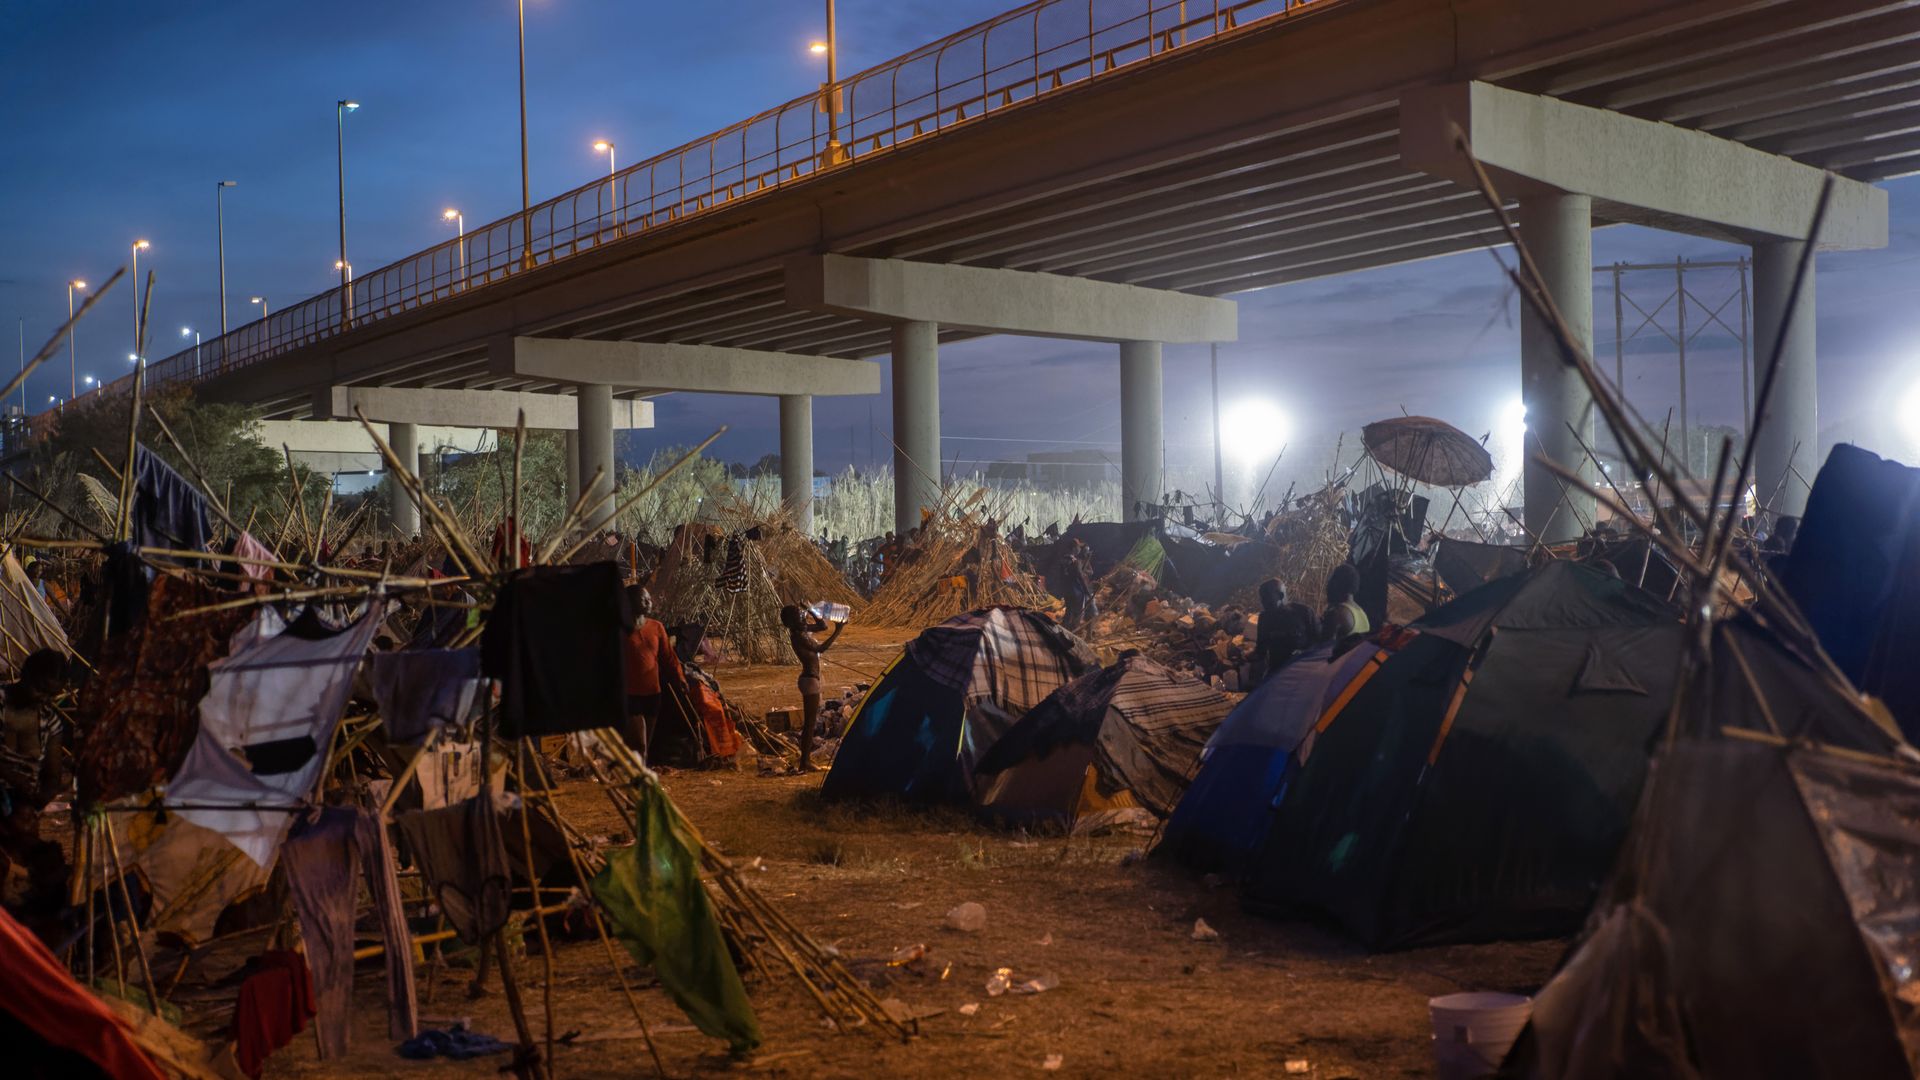 Picture of the Del Rio bridge with many tents underneath